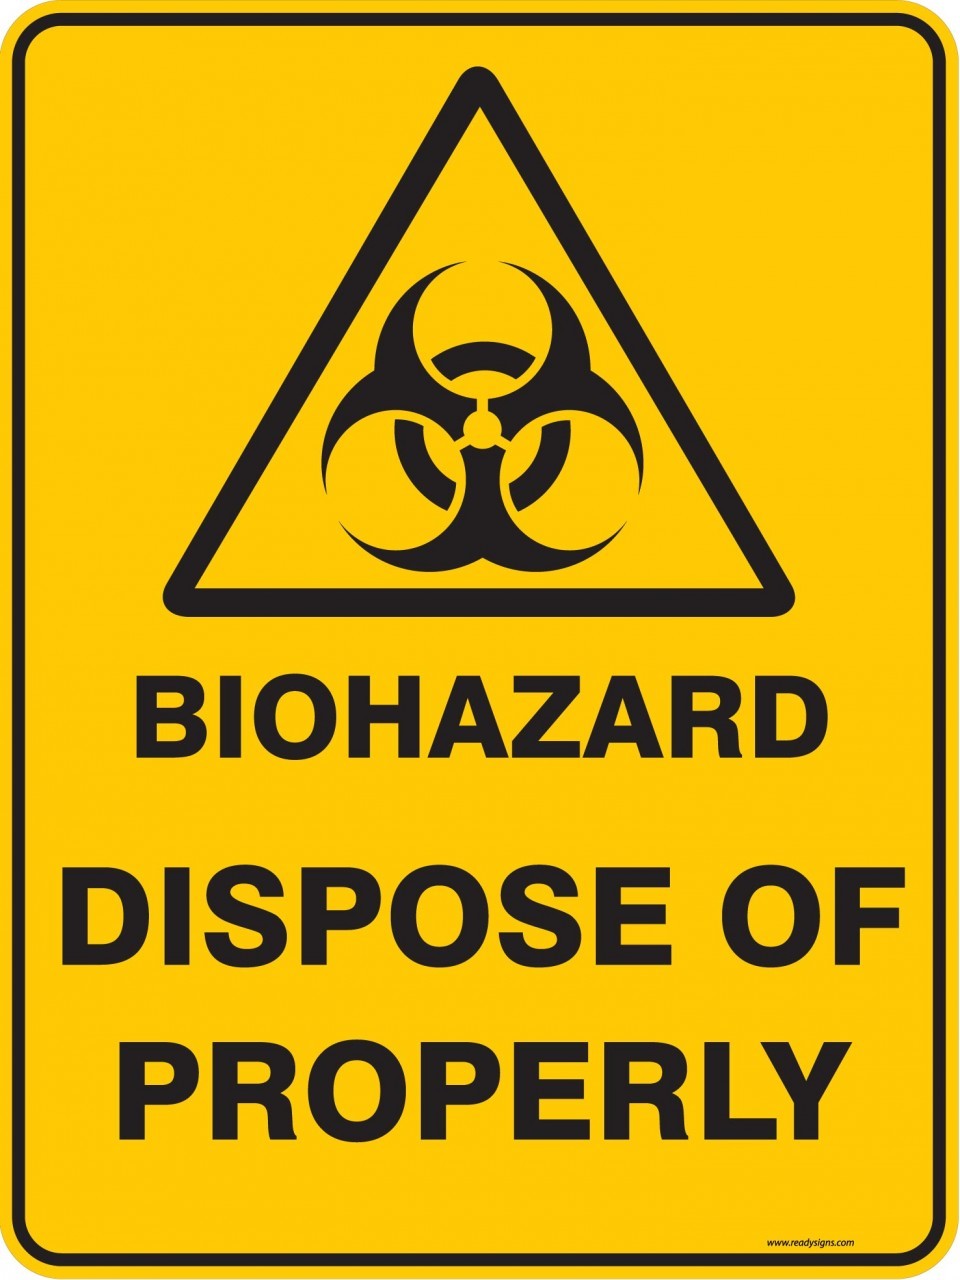 Warning Sign - BIOHAZARD DISPOSE OF PROPERLY - Property Signs